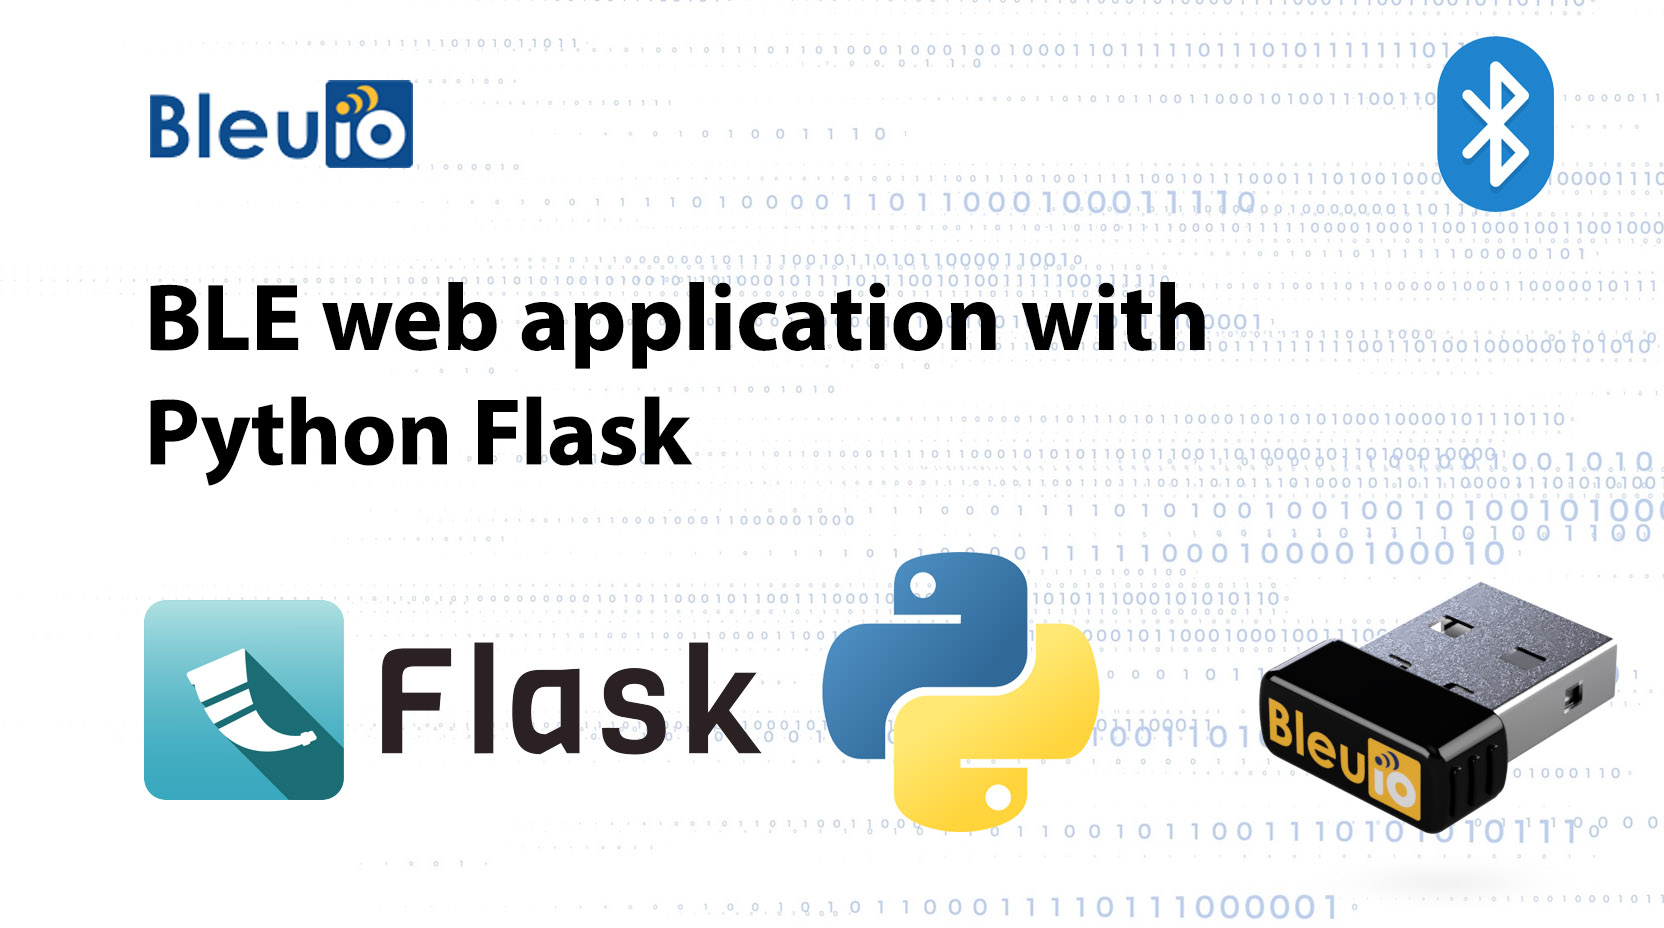 Building BLE web application with Python Flask and BleuIO